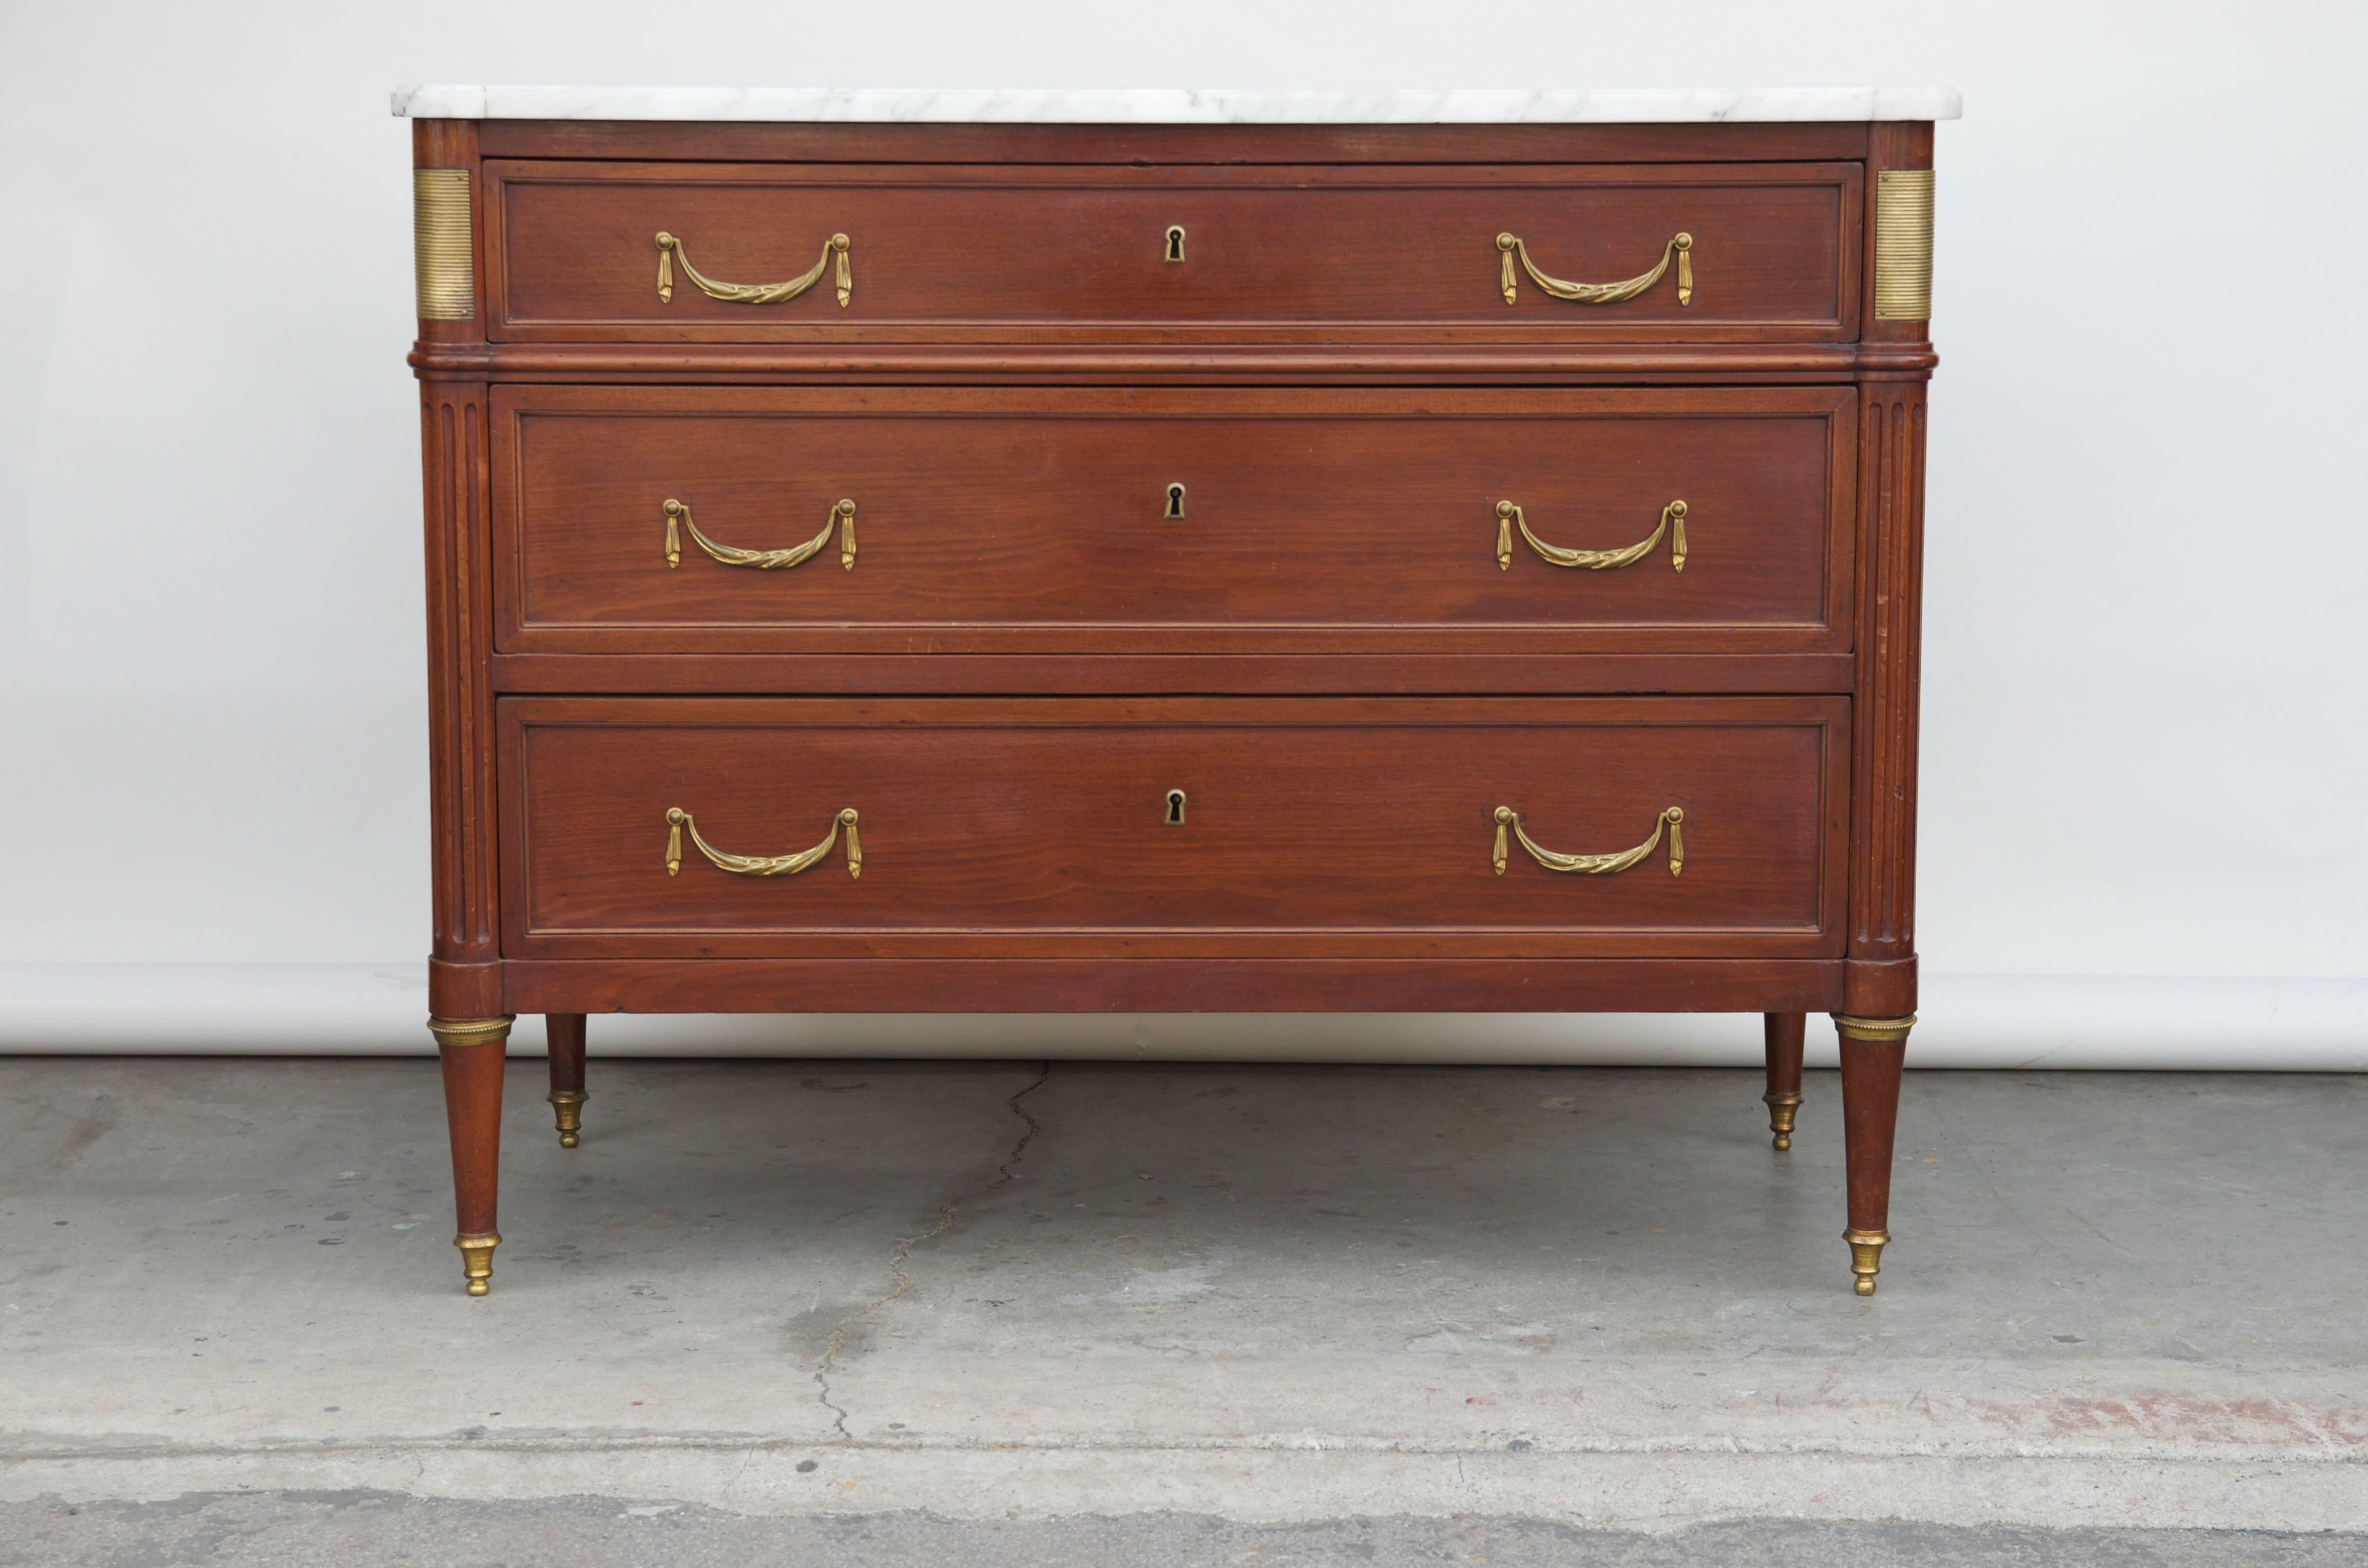 Chic Louis XVI style neoclassical commode by Maison Jansen. Elegant and simple.

The last picture gives an example of how this commode could look in situ.